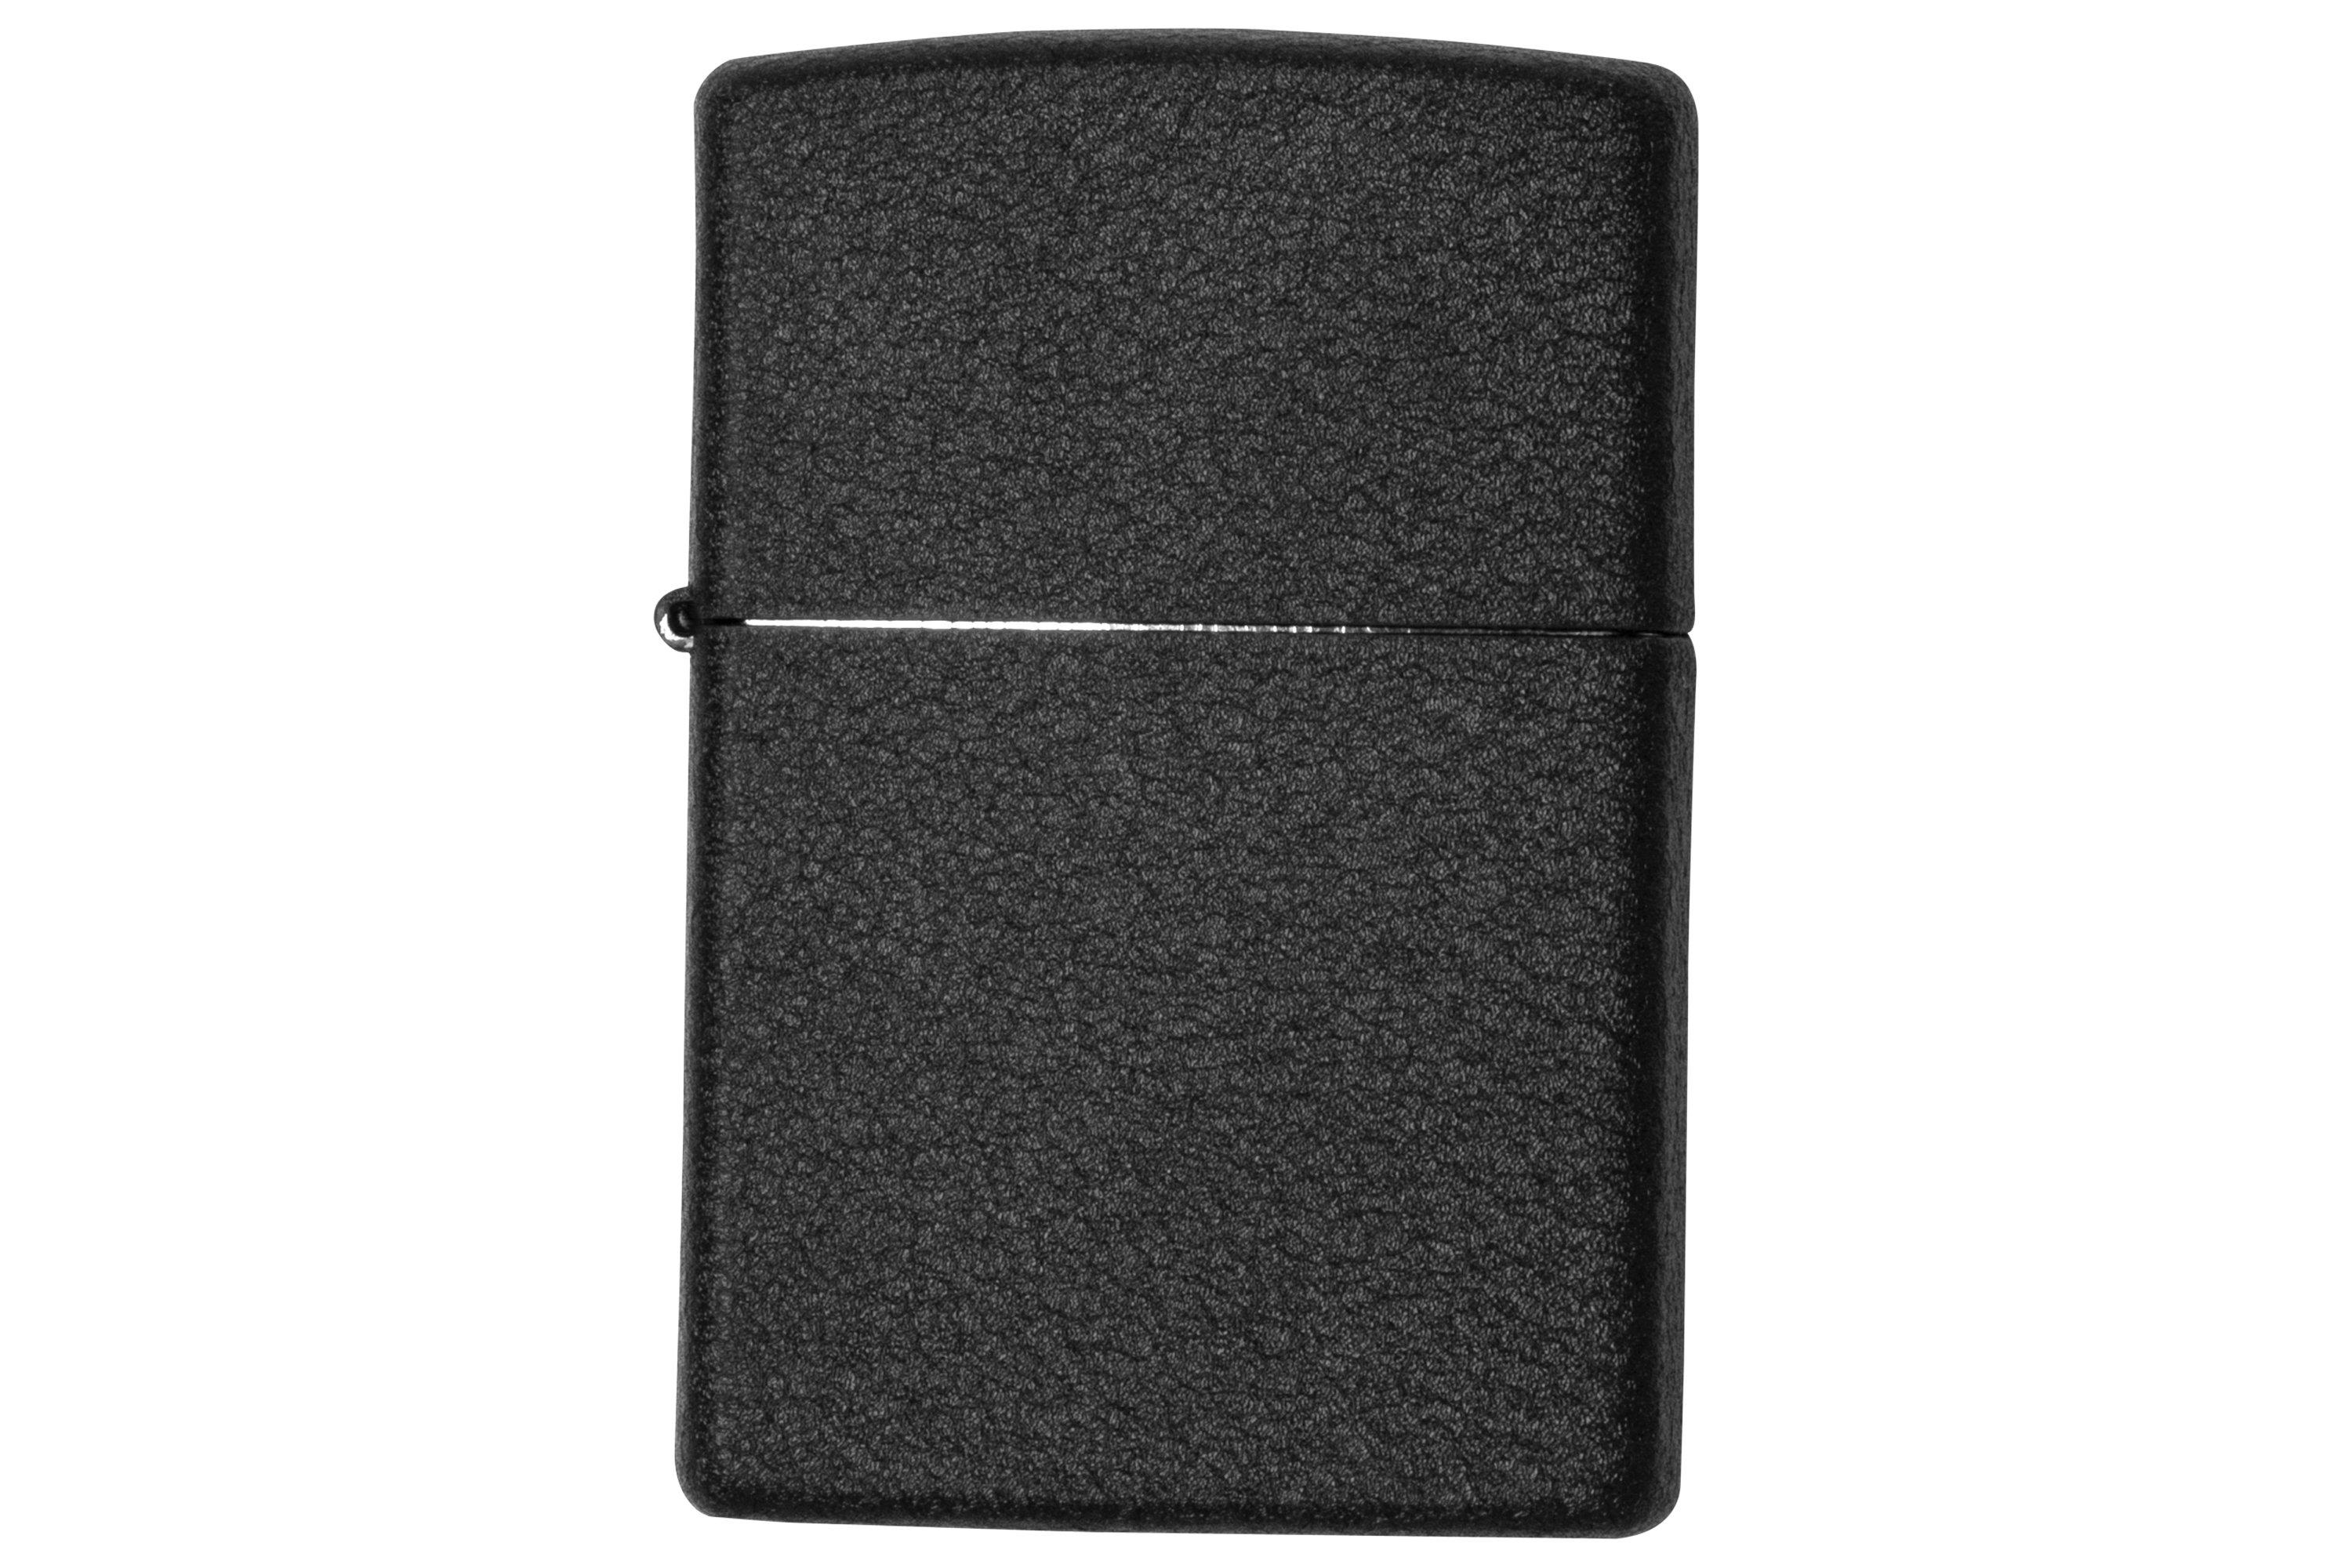 Zippo Black Crackle 60001196, lighter | Advantageously shopping at ...